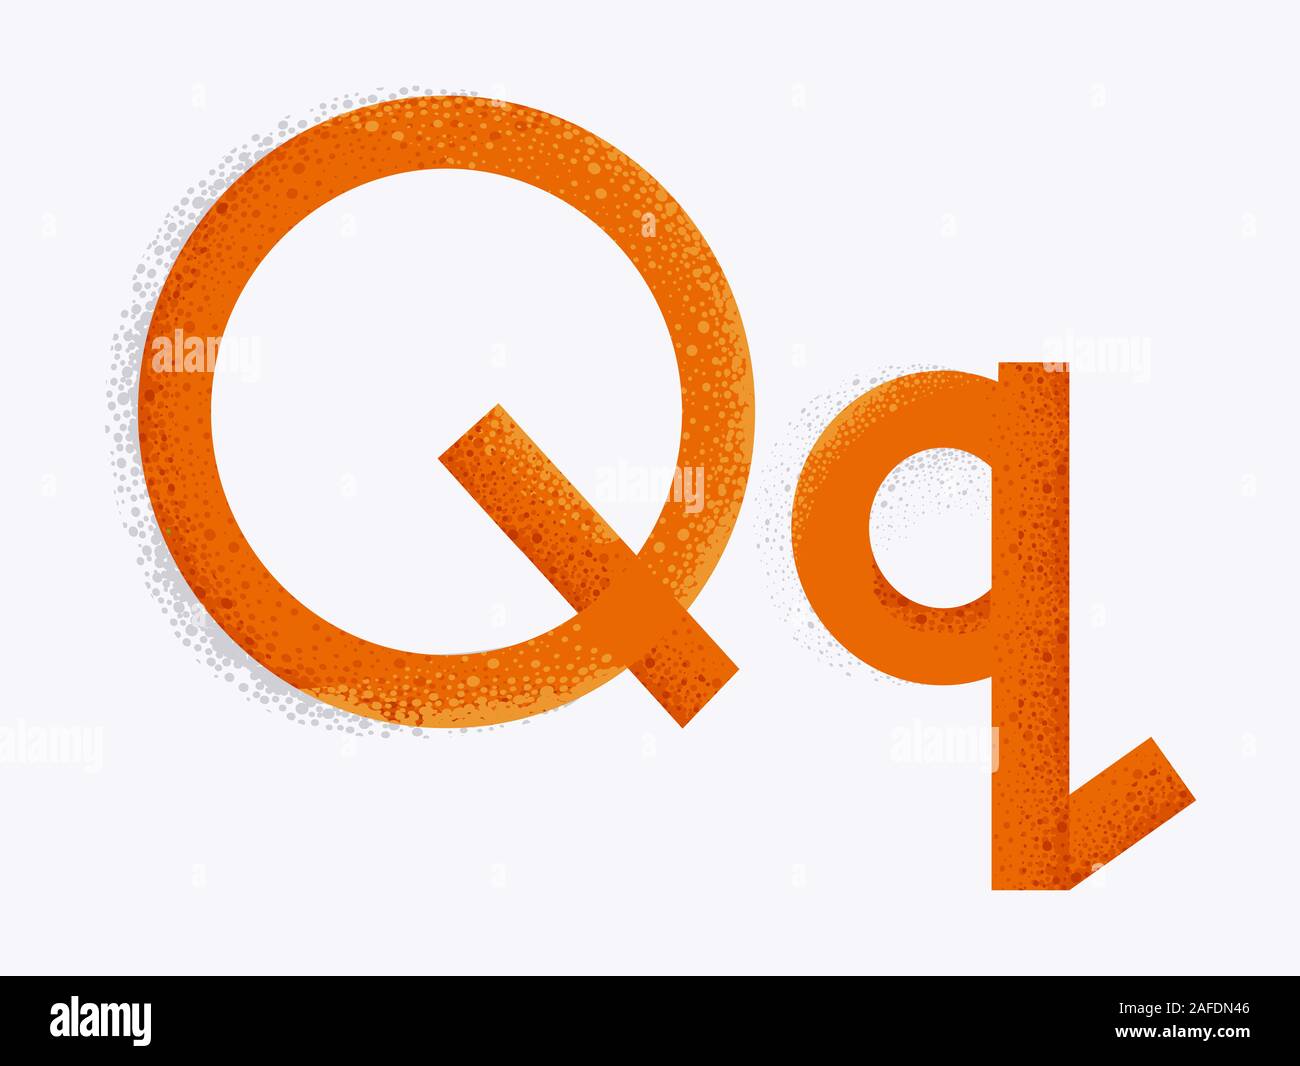 Illustration of Decorative Alphabet with Capital and Small Letter Q and Dust Particle Effect Stock Photo